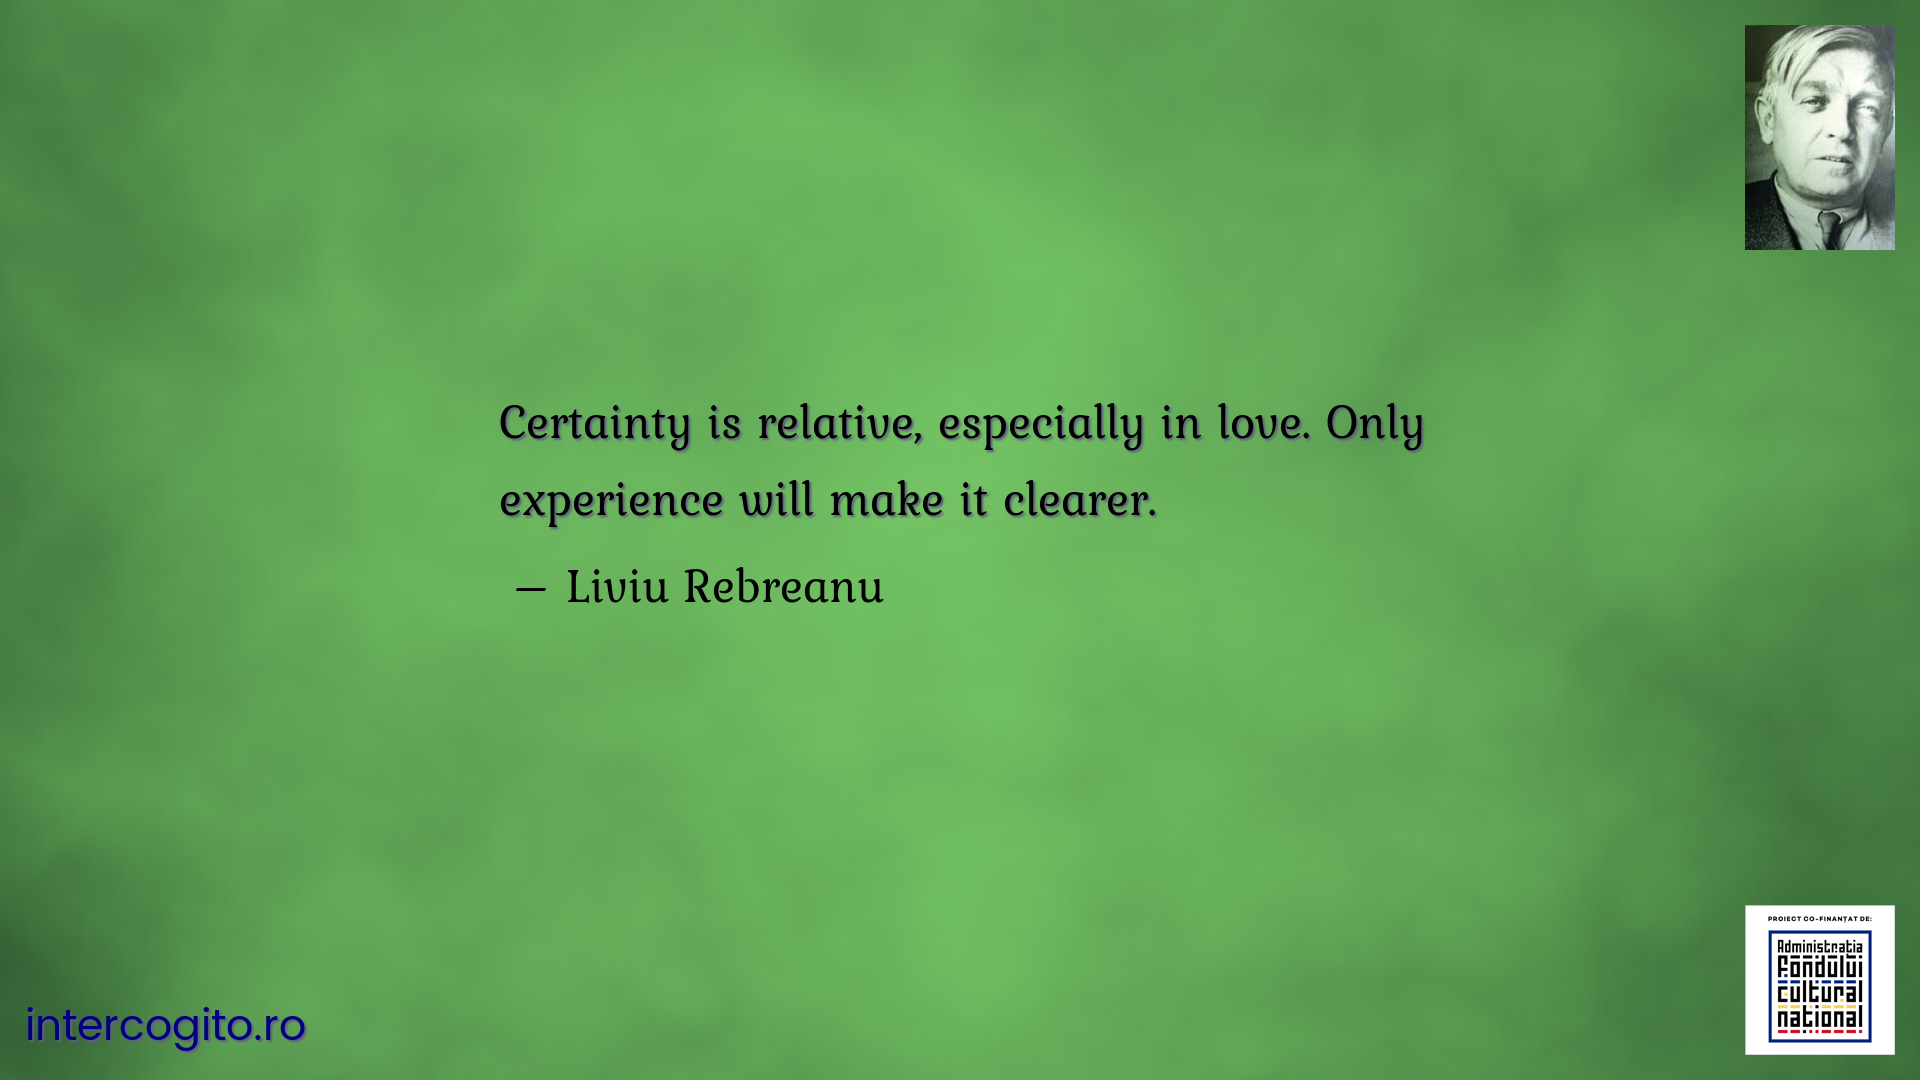 Certainty is relative, especially in love. Only experience will make it clearer.